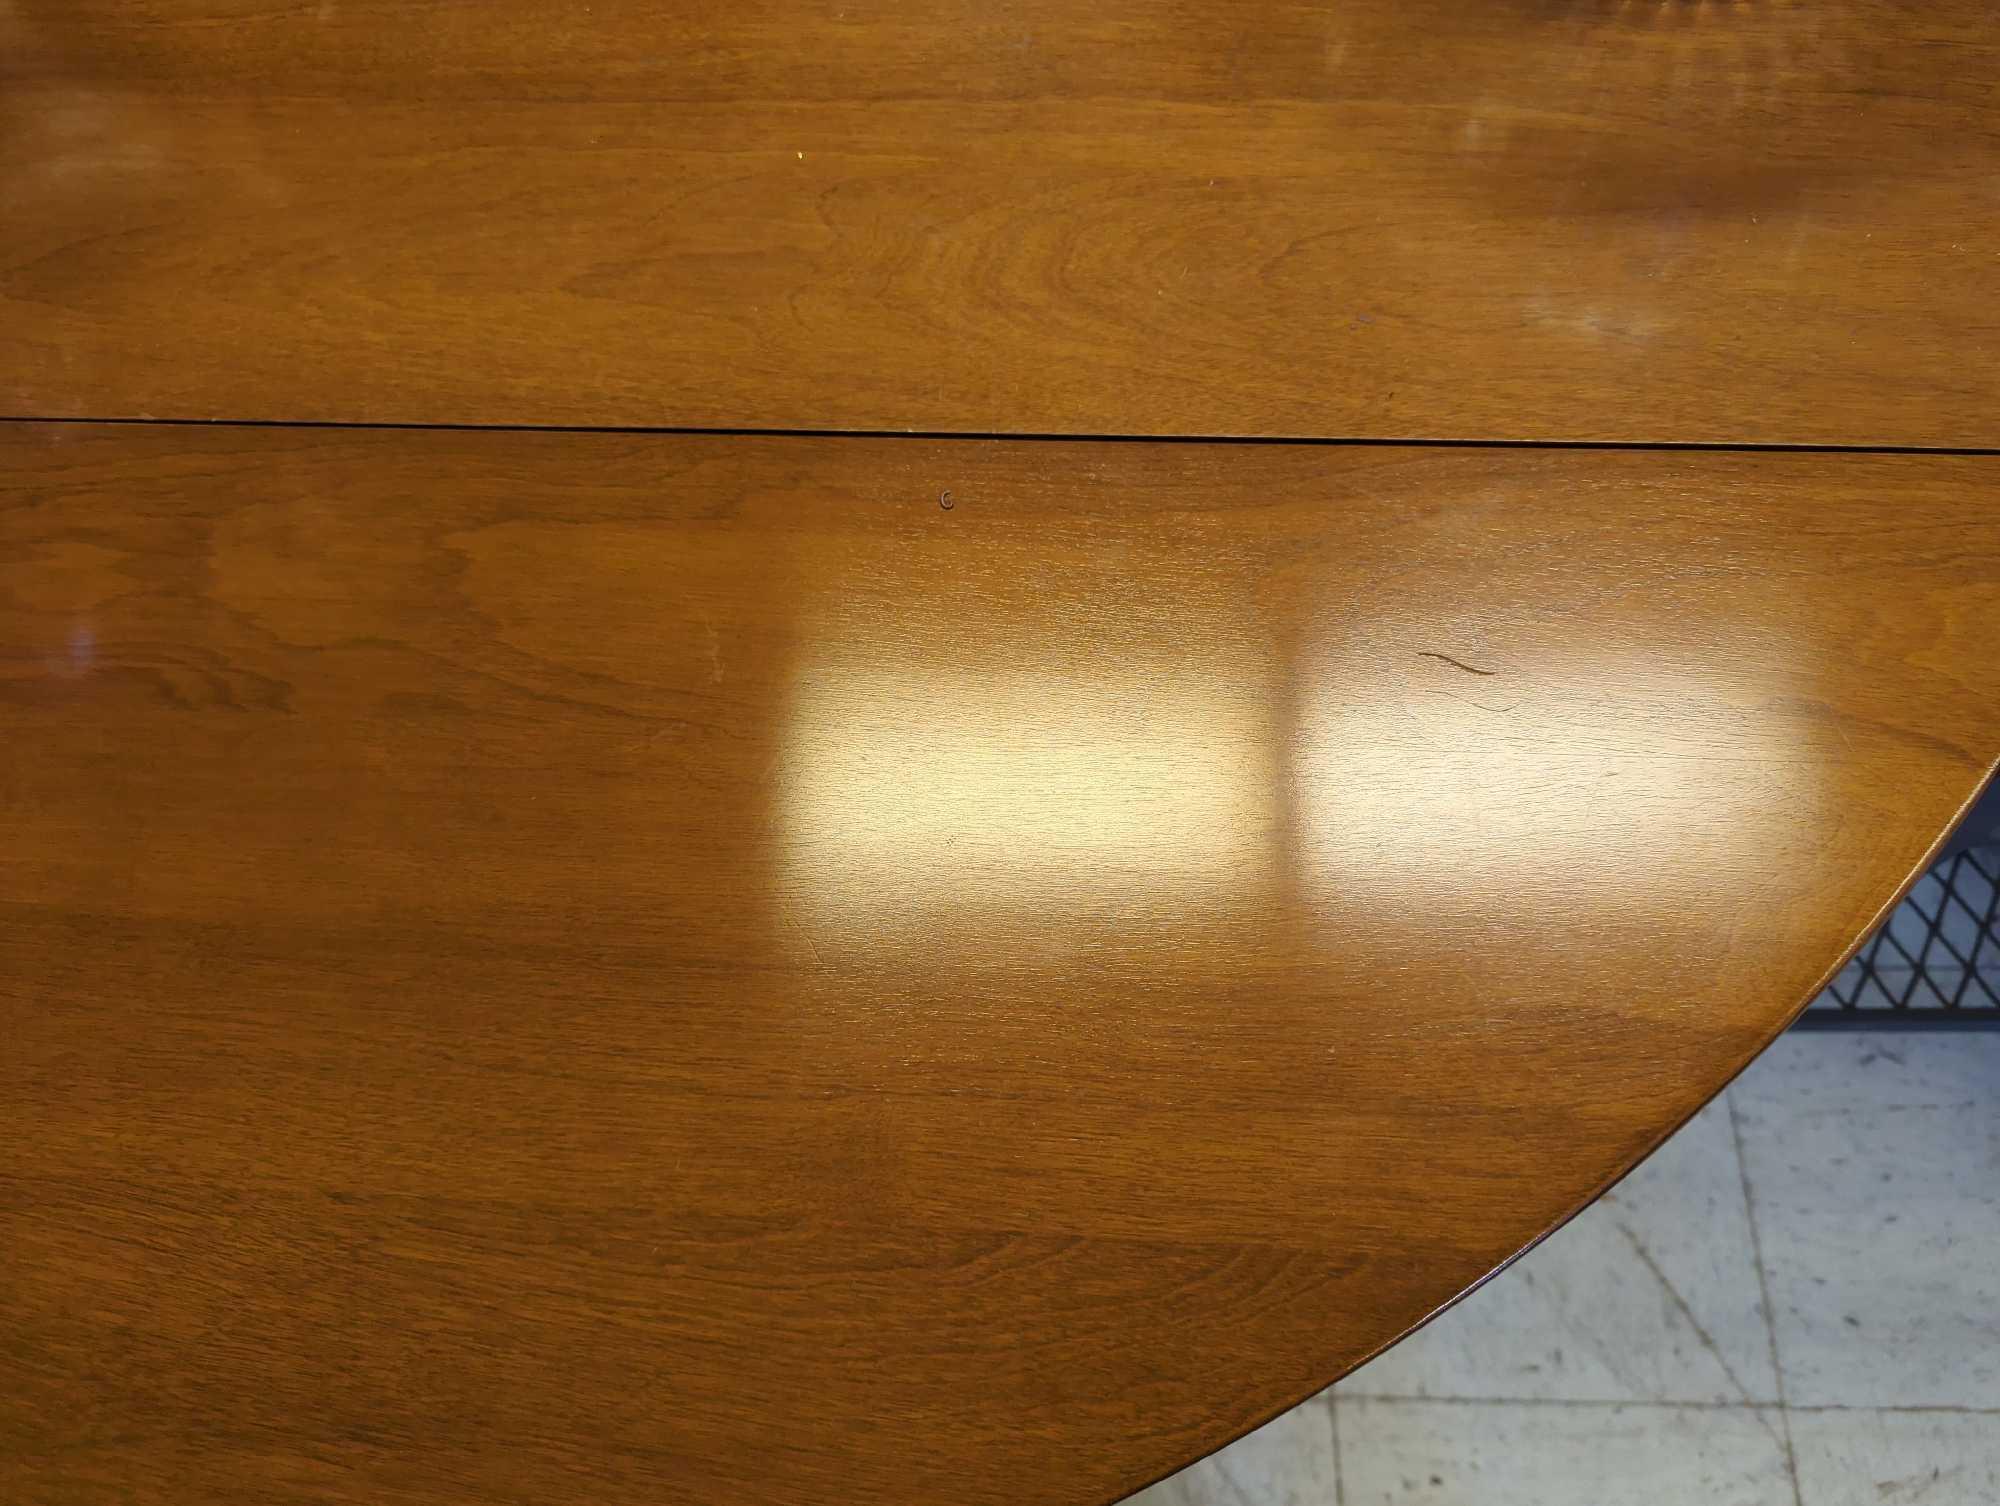 Maple Gateleg Drop Leaf Dining Table, Has Some Minor Scratches Measure Approximately (Open) 54 in x